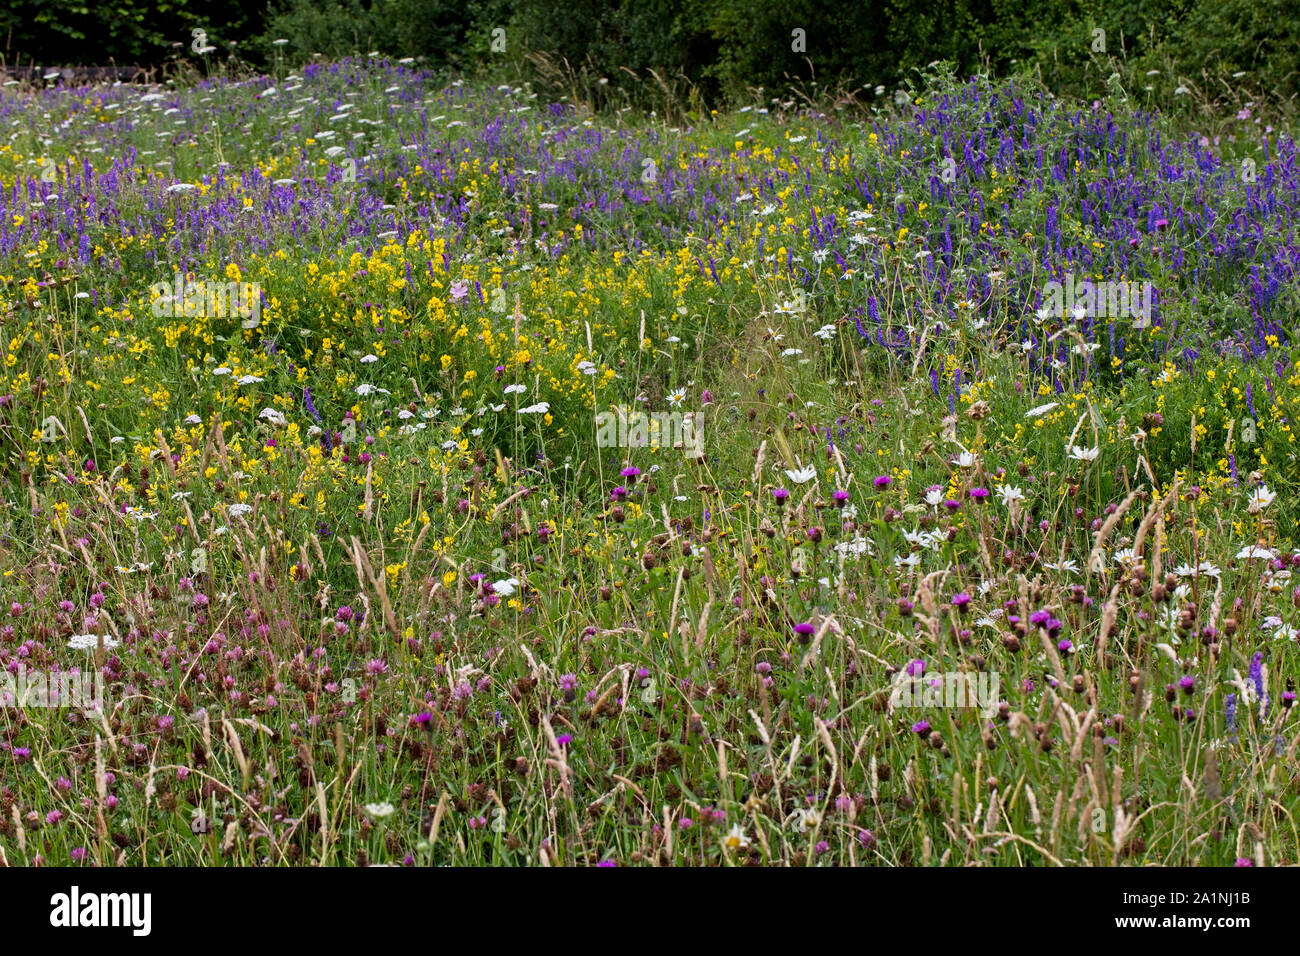 Wild flower meadow with Knapweeds, Trefoils, Vetches and Yarrow, Rutland Water, Leicestershire, England, UK. Stock Photo